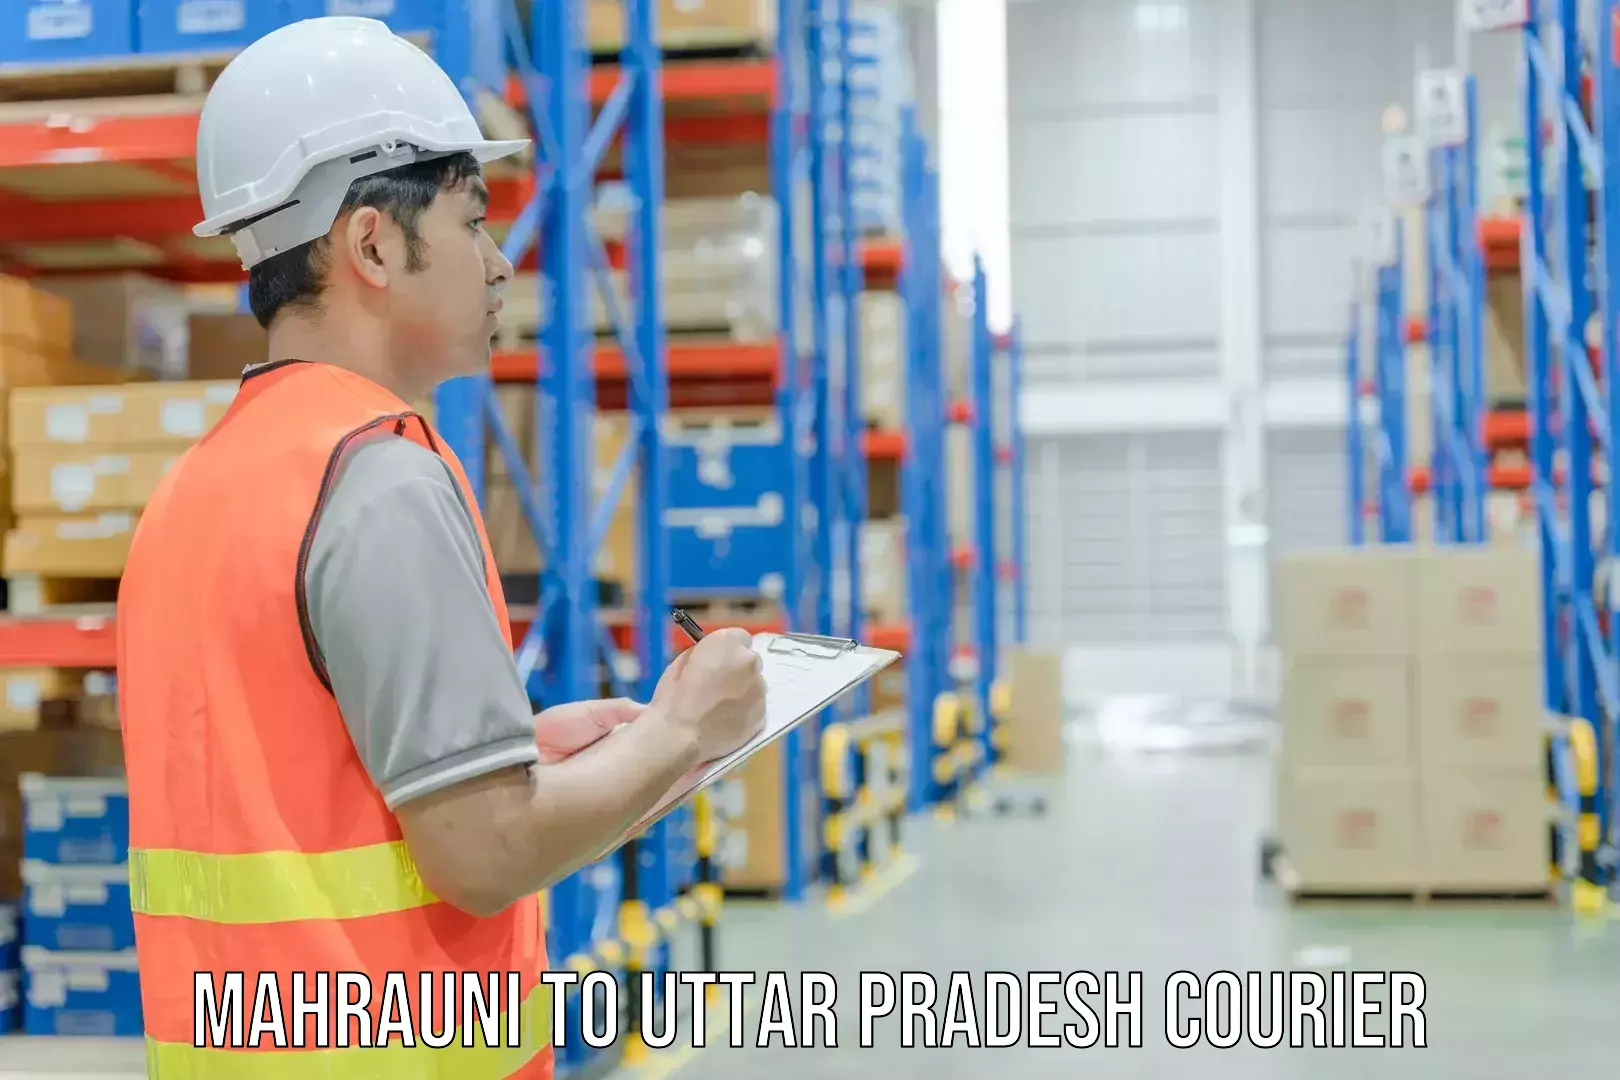 Dynamic courier operations Mahrauni to Agra